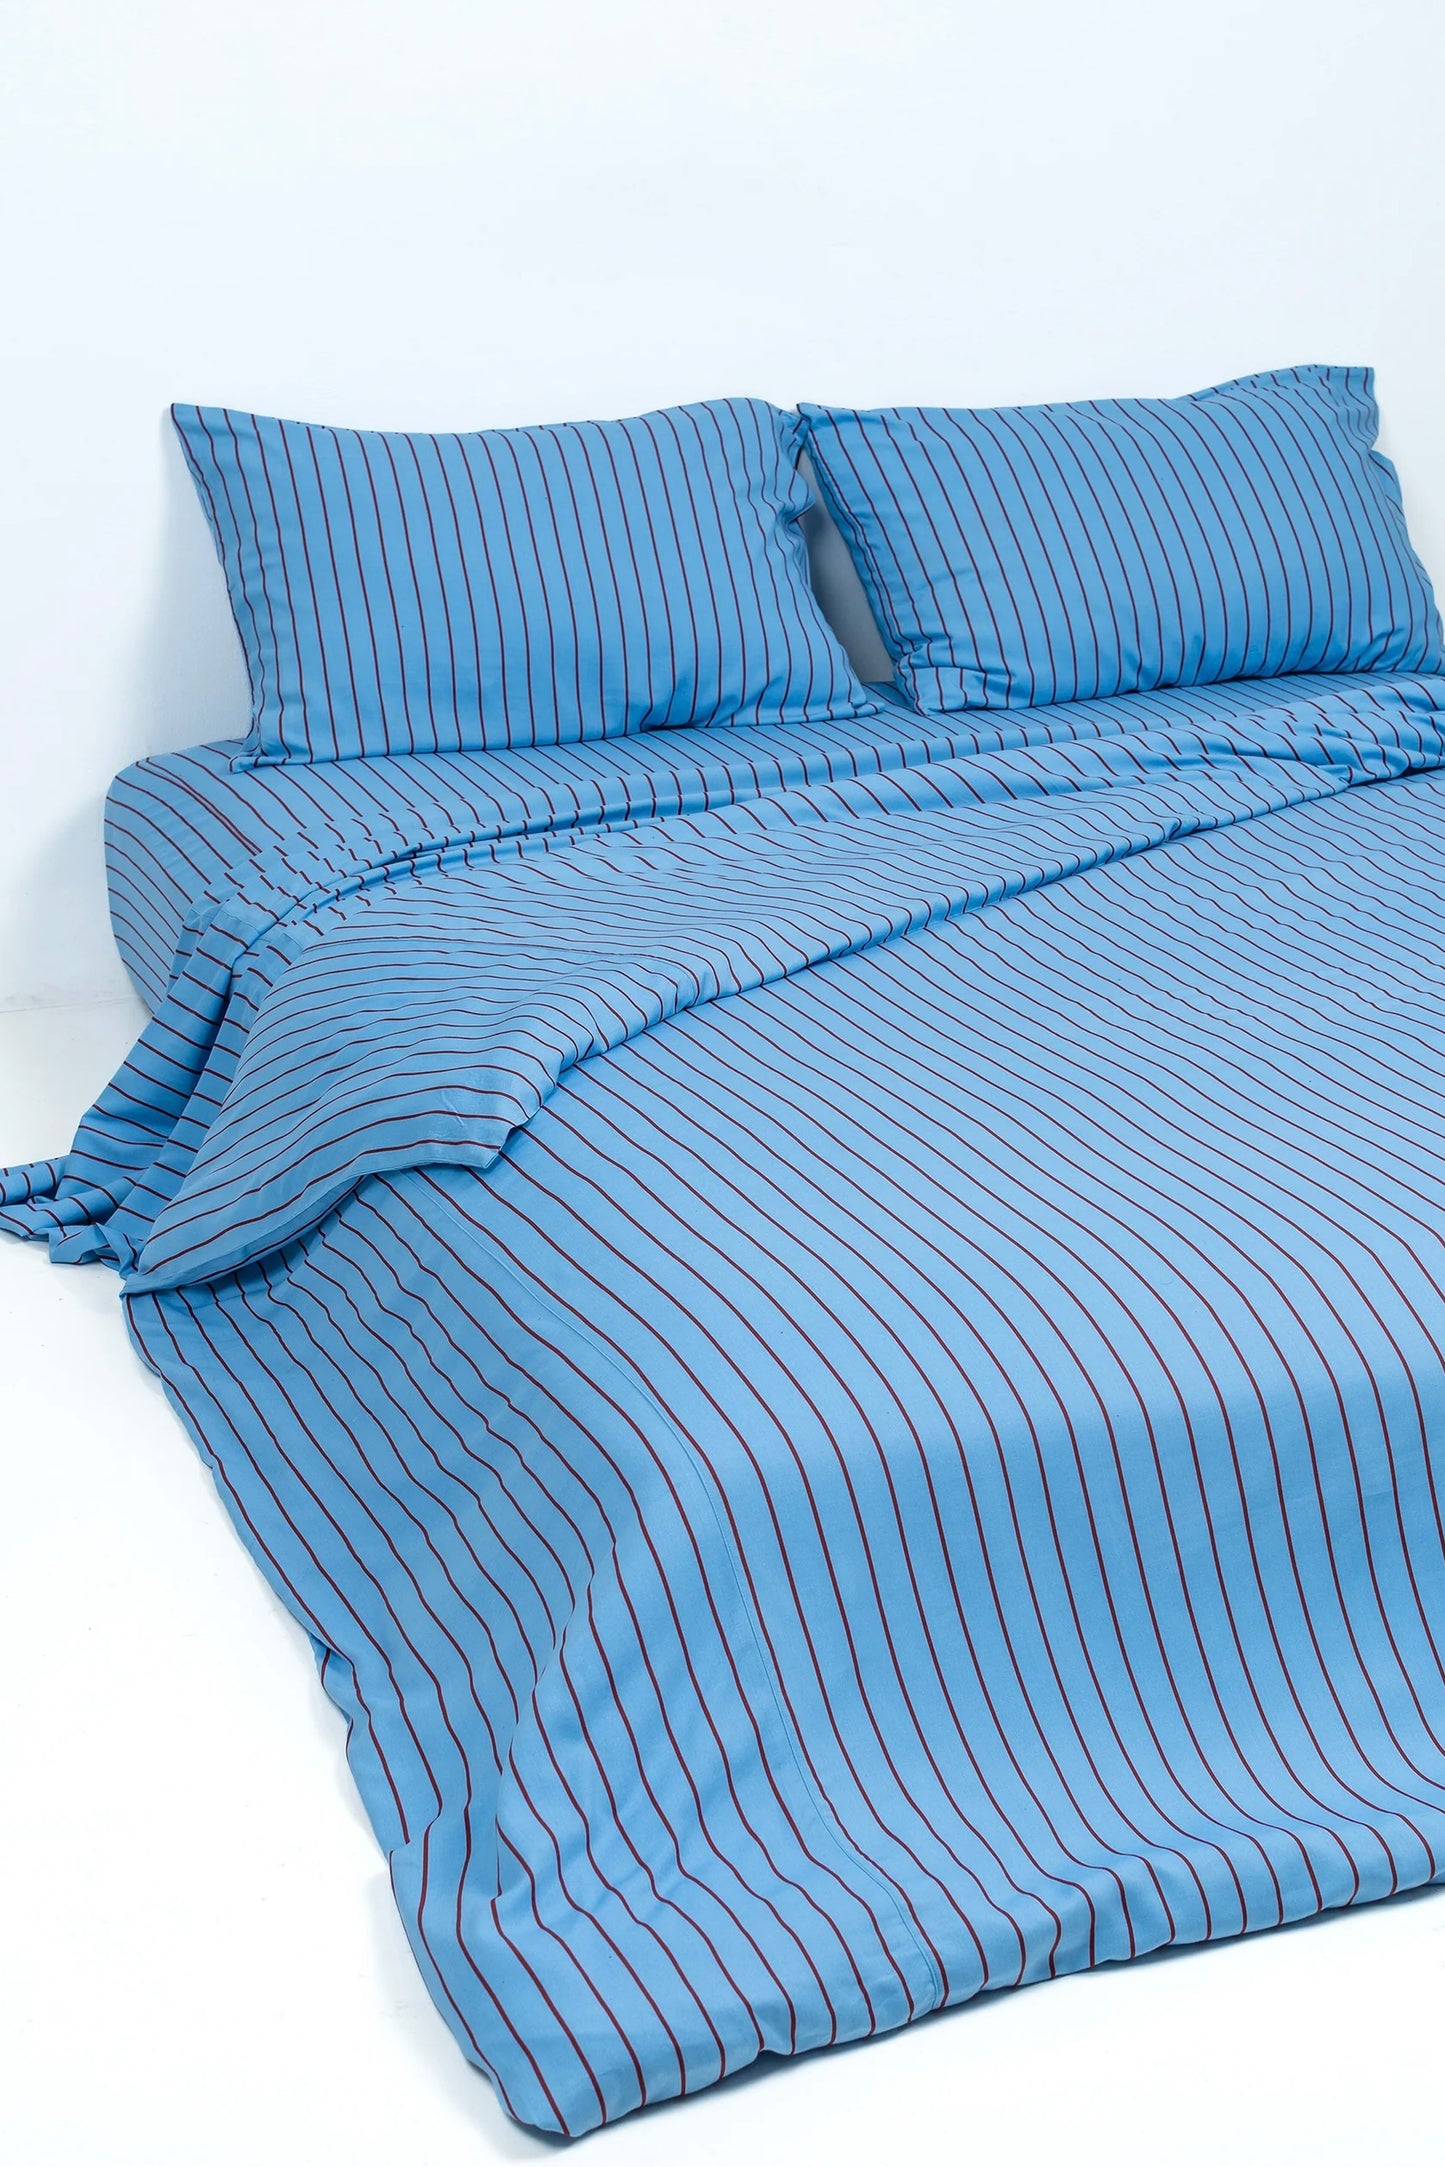 BLUEBERRY STRIPE QUILT COVER